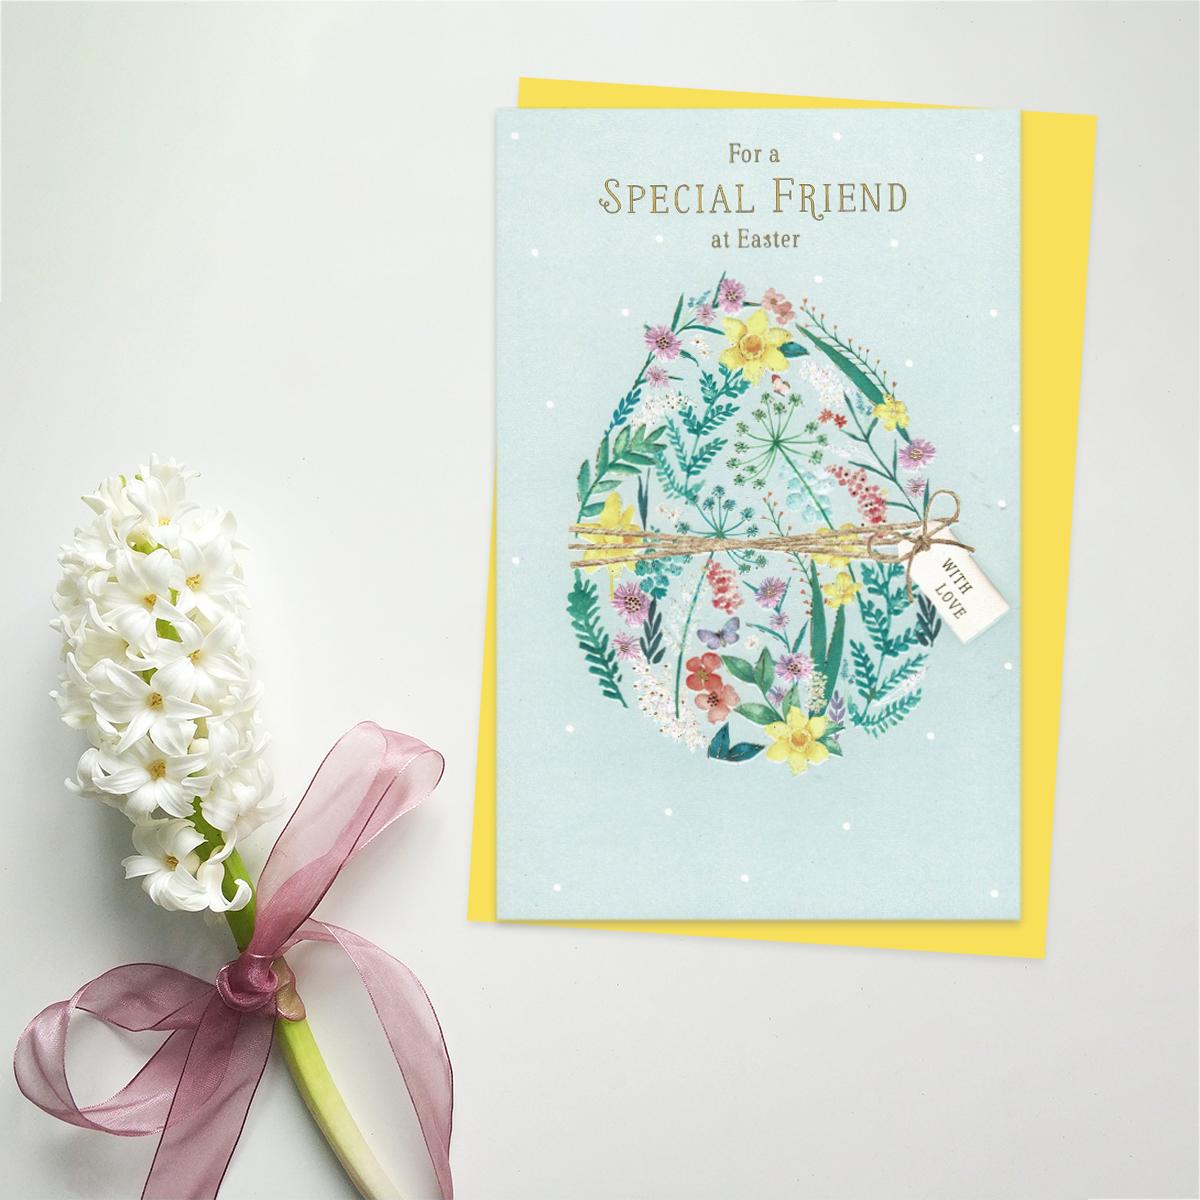 Special Friend Easter Card Alongside Its Yellow Envelope